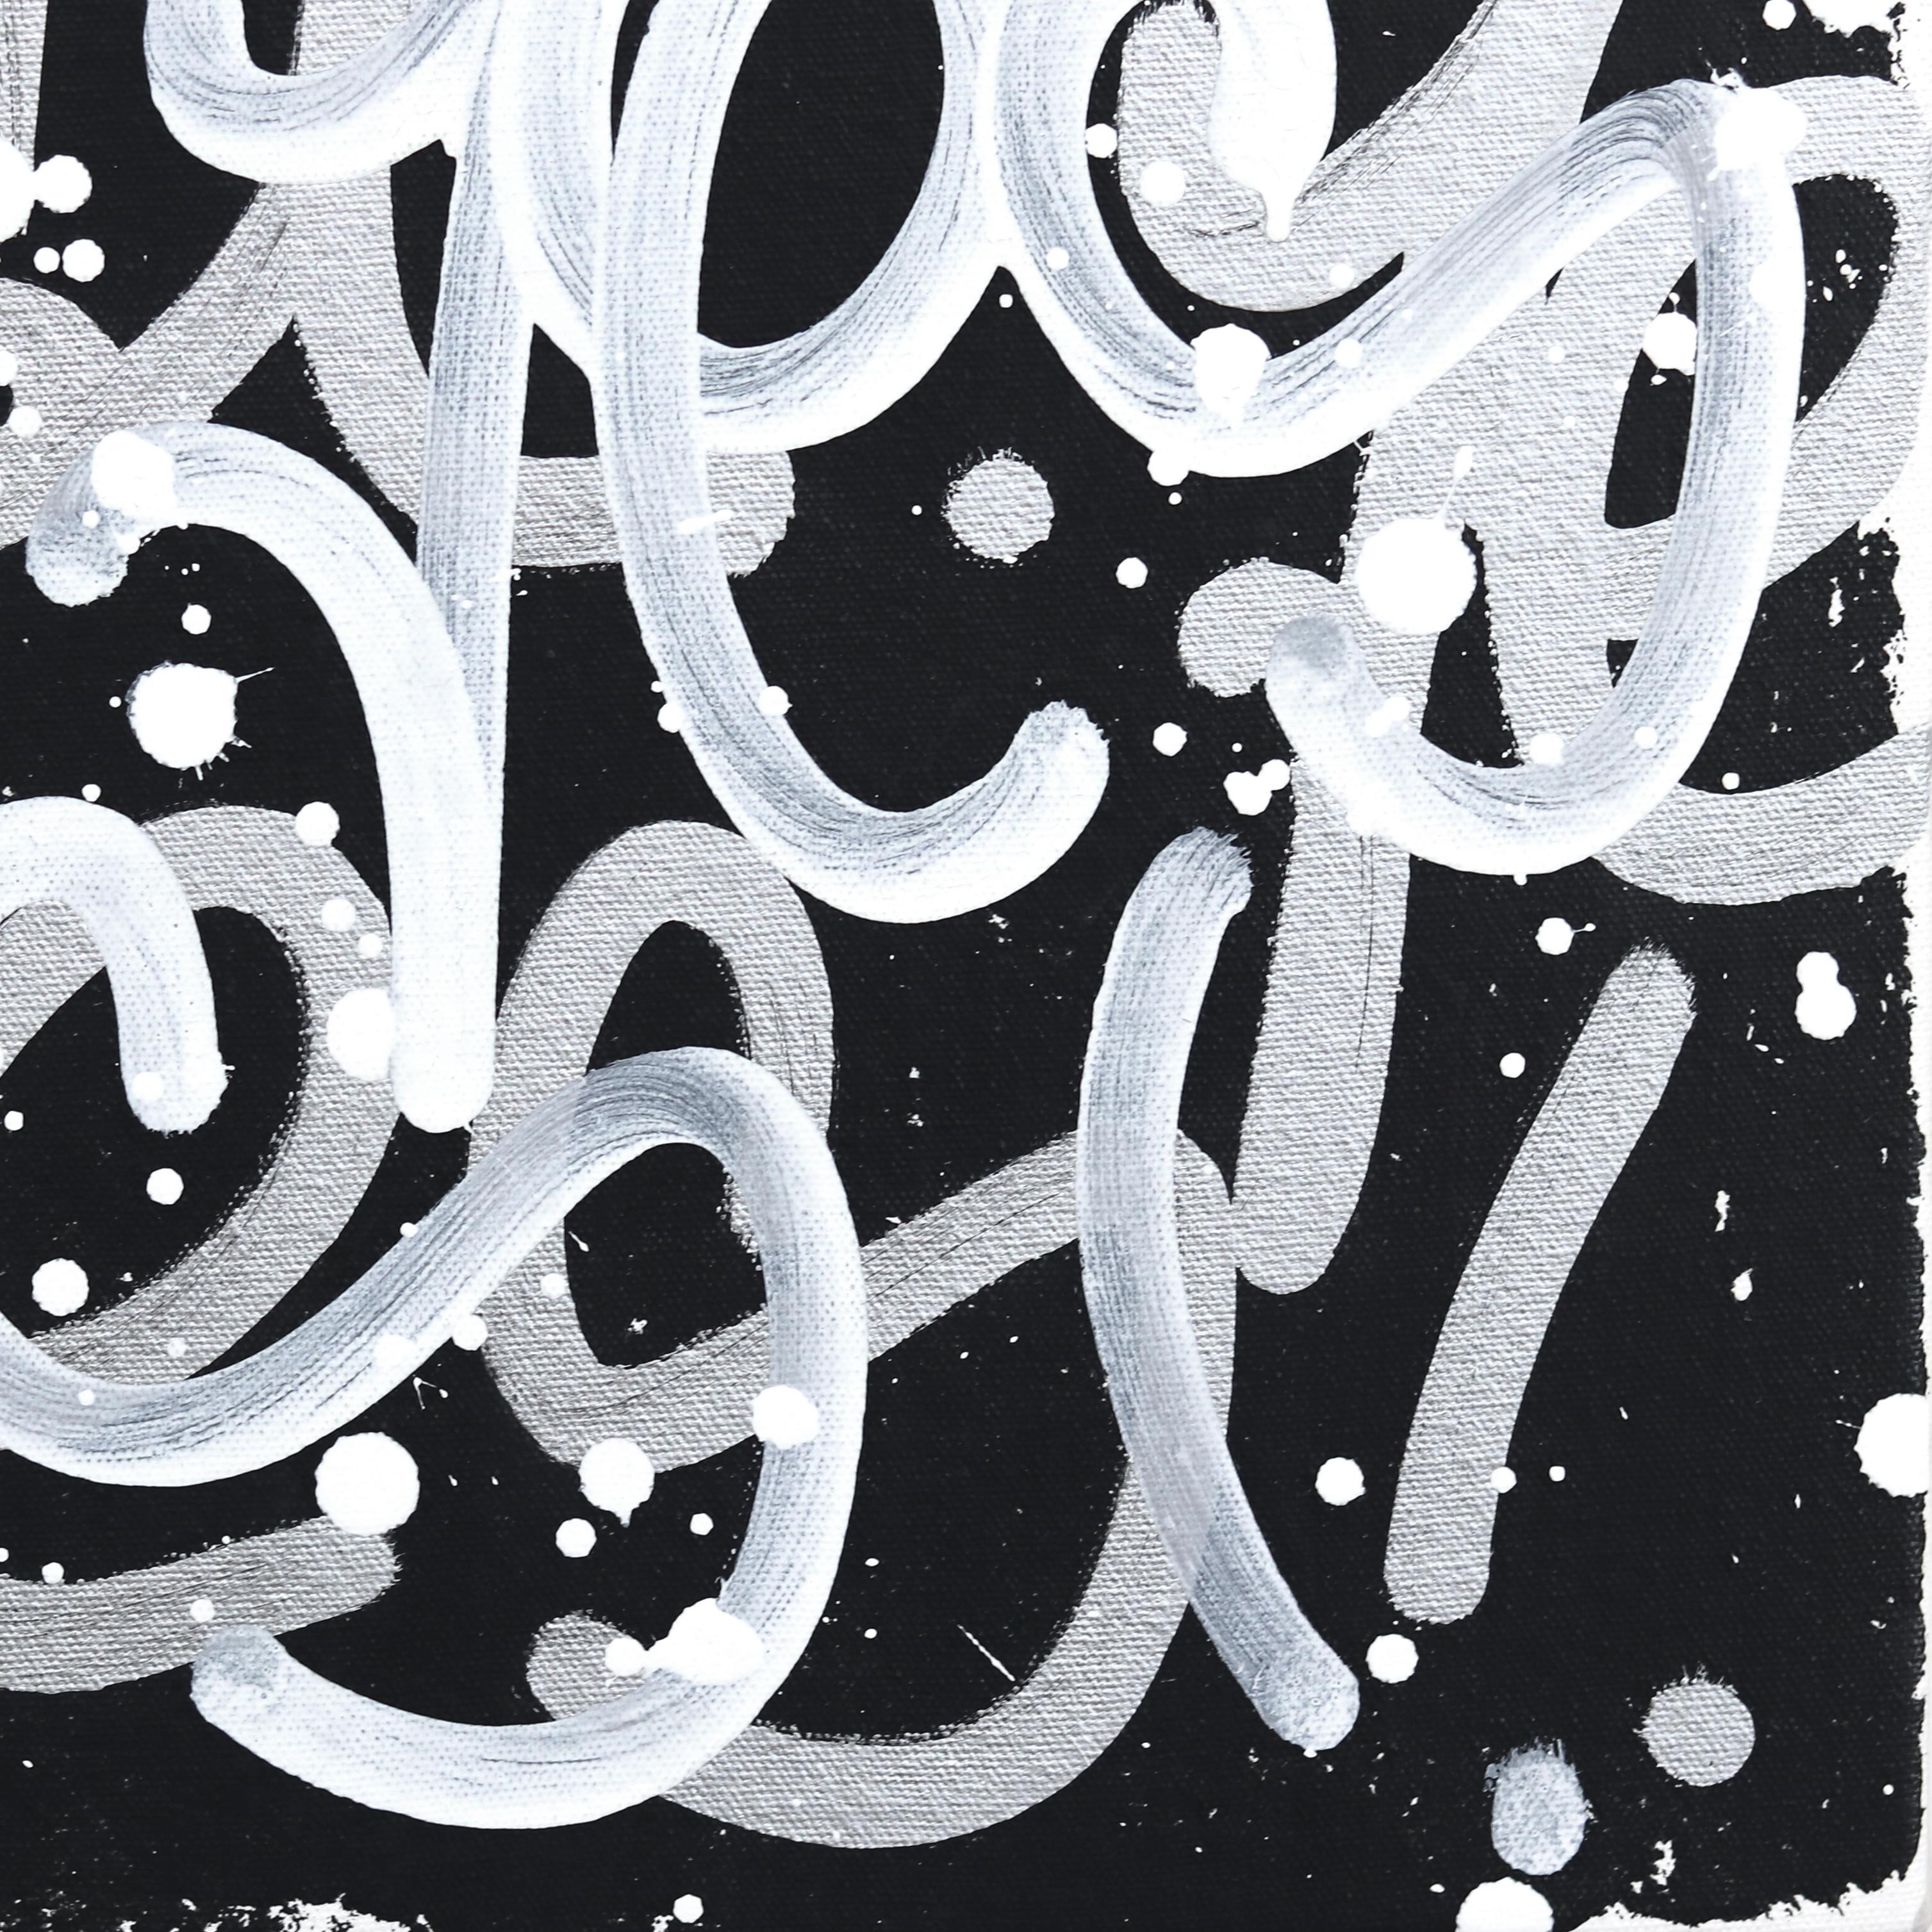 She Said Yes - Black and White Positive Word Art on Canvas For Sale 5